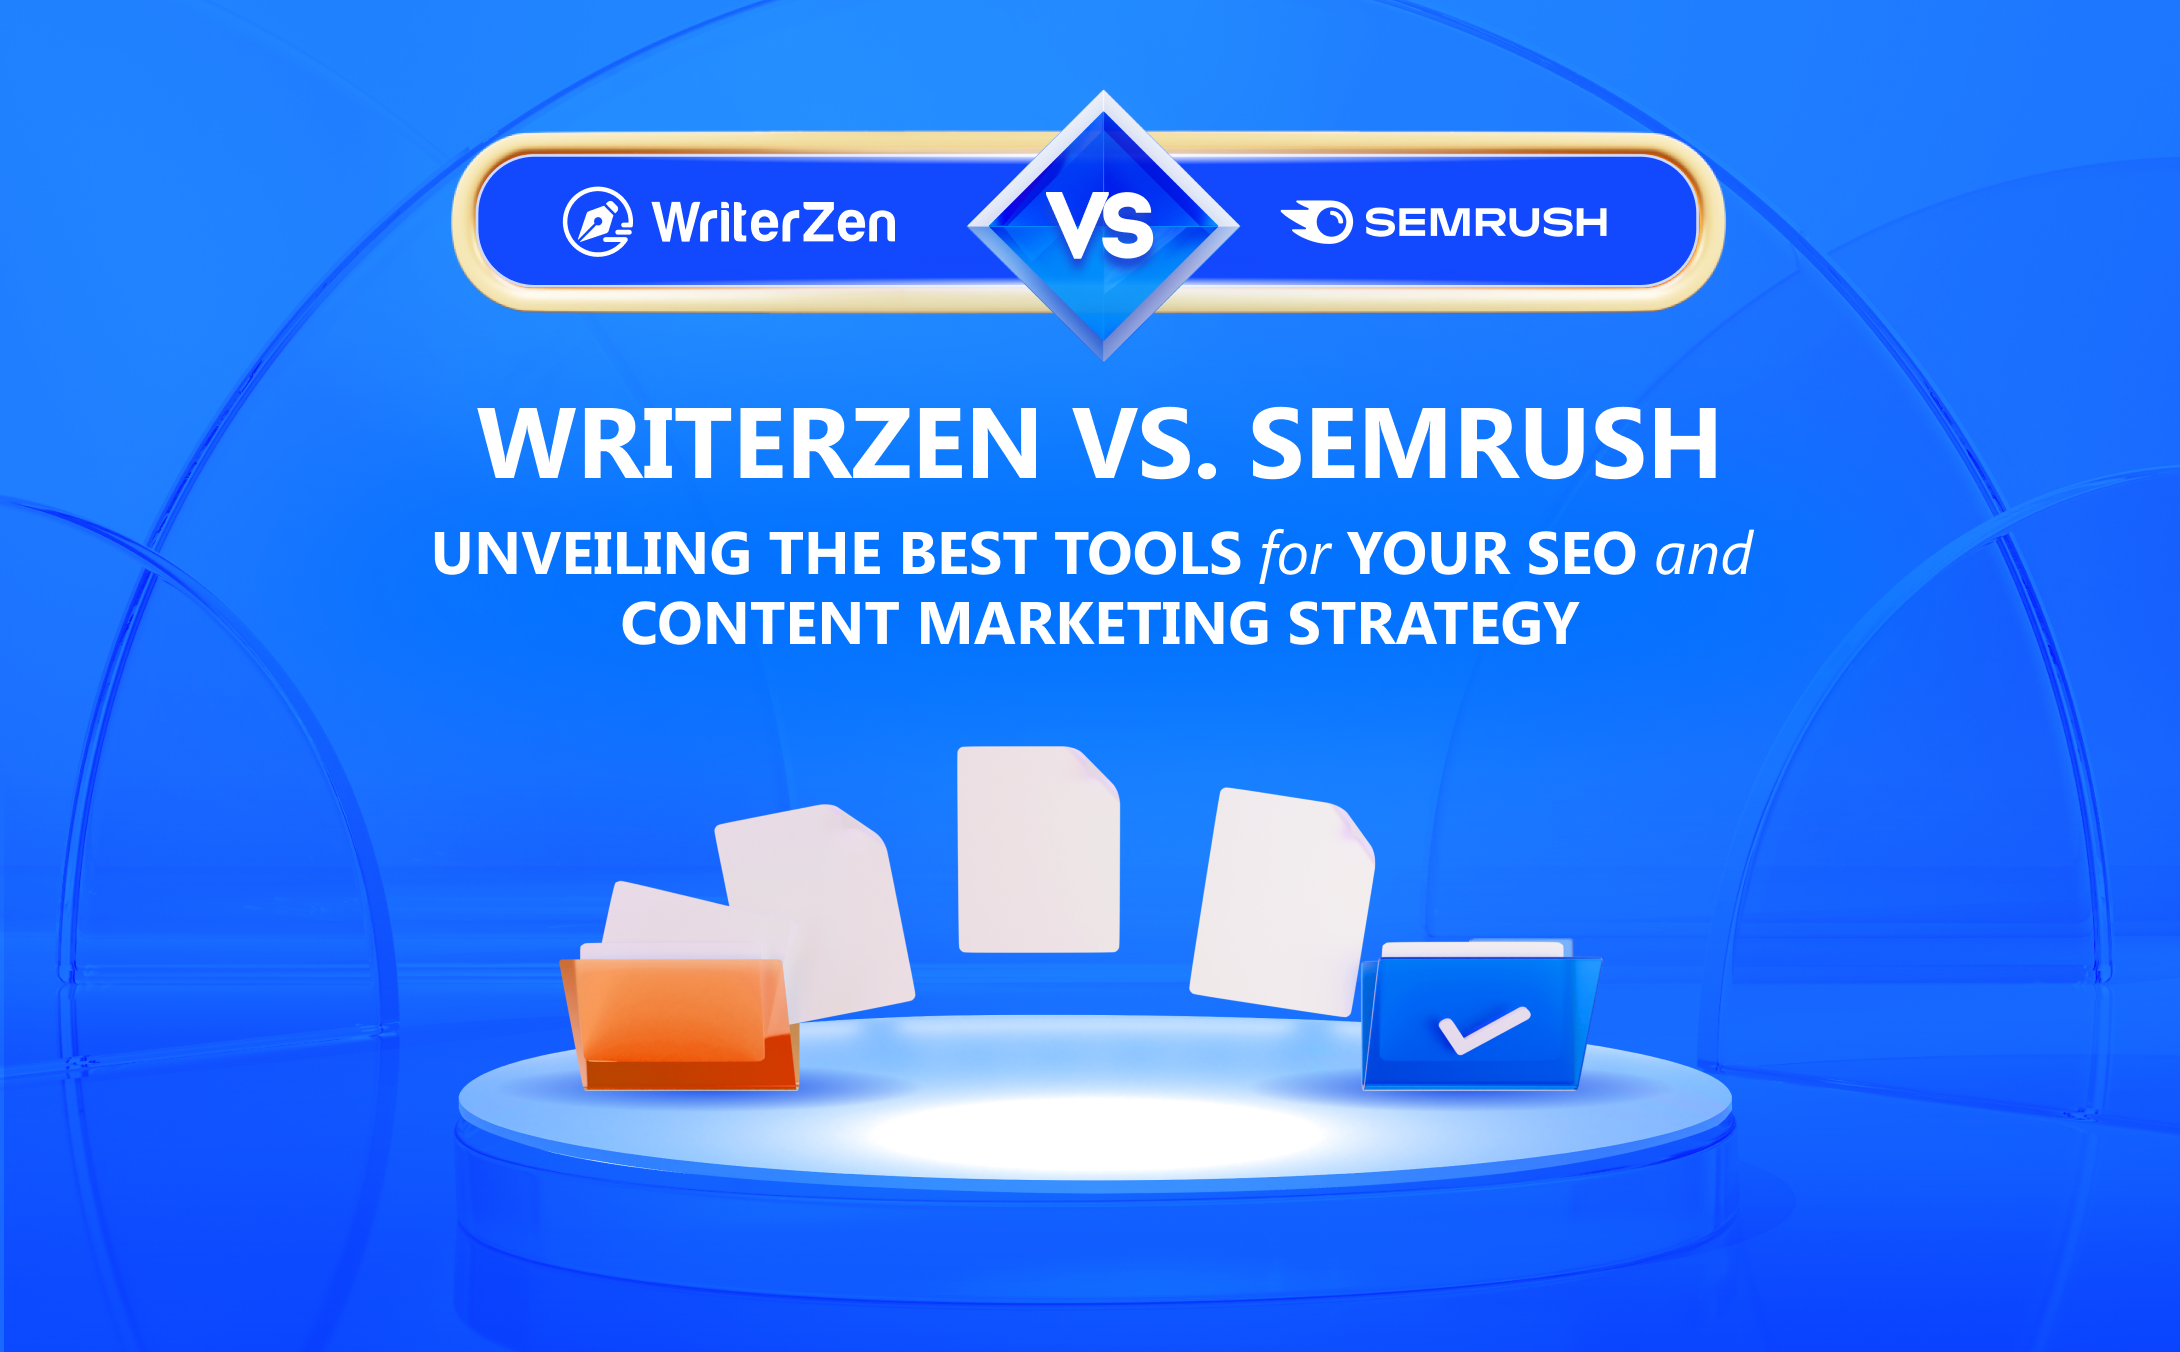 WriterZen vs. SEMrush: Unveiling the Best Tools for Your SEO and Content Marketing Strategy